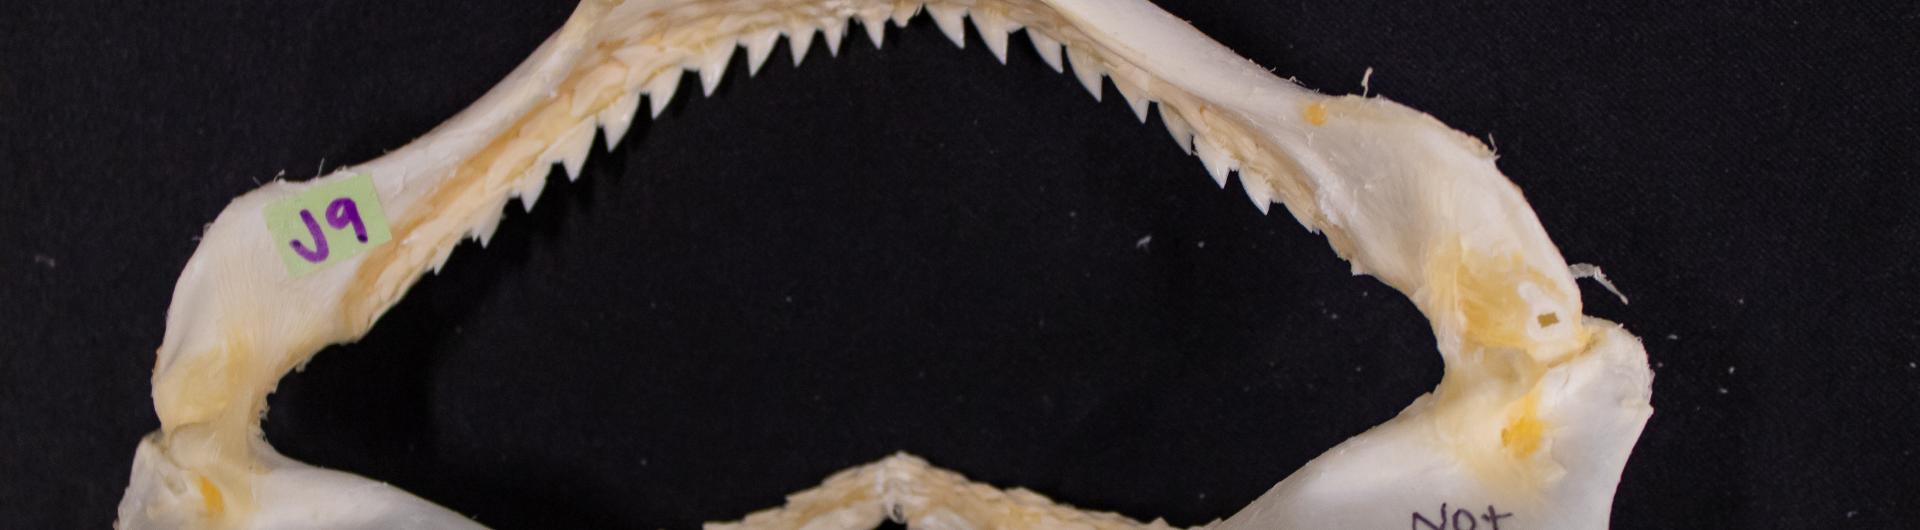 Close-up of a shark jaw